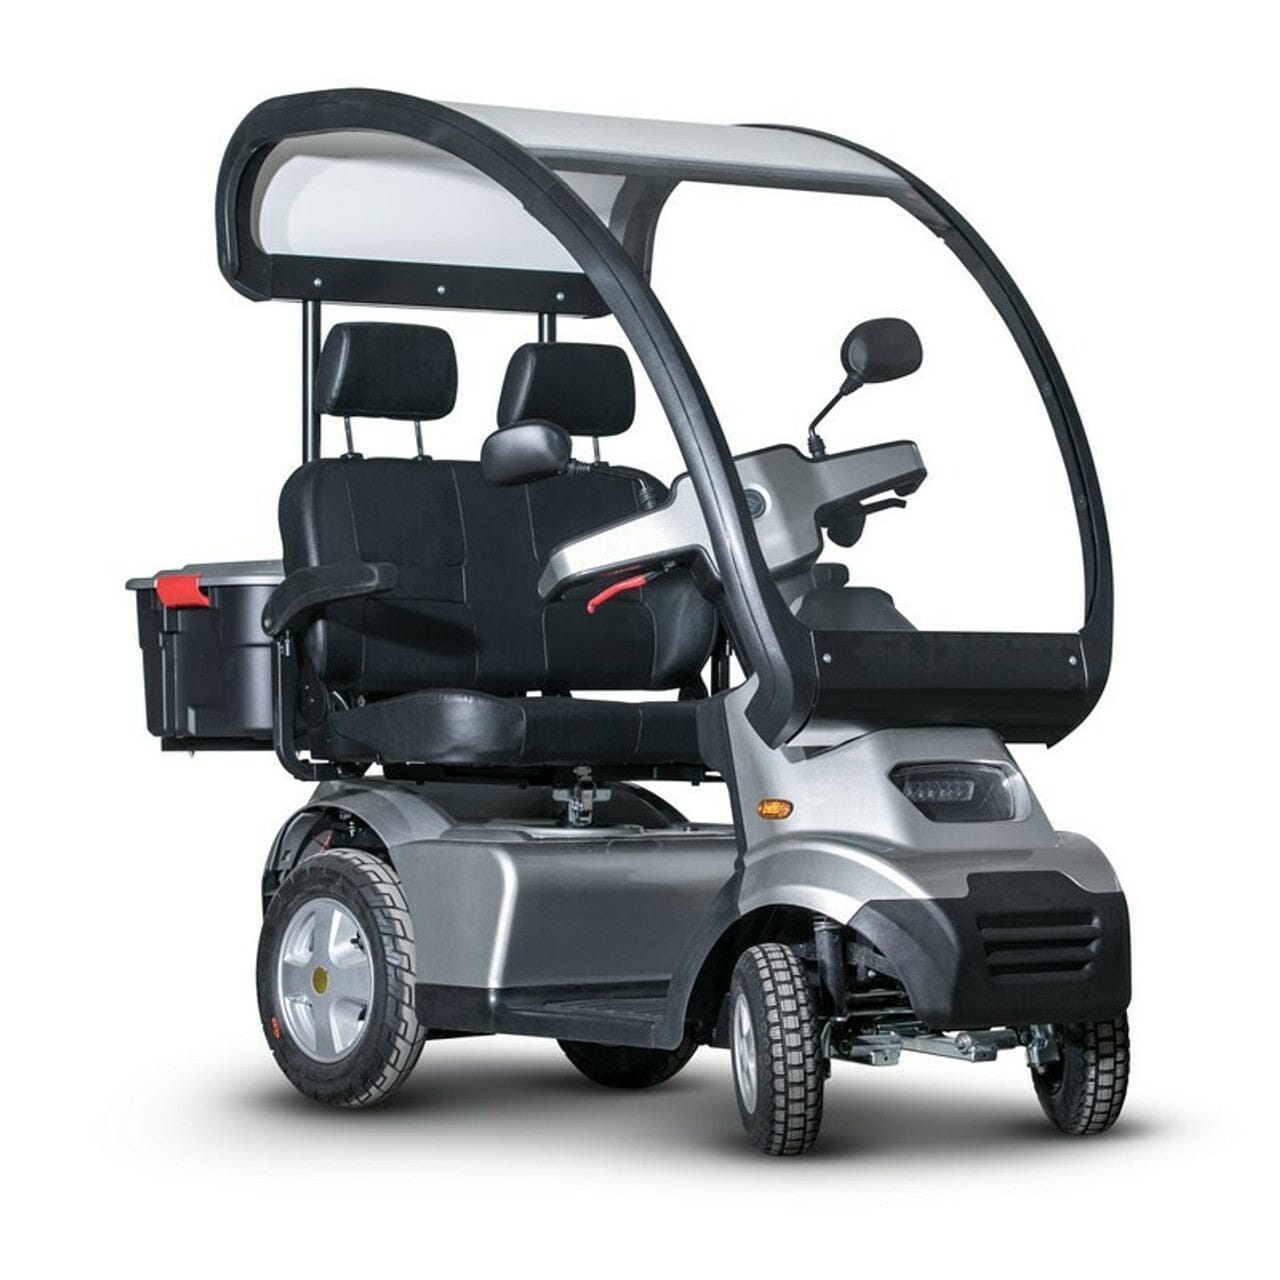 Afiscooter S4 - The Touring Canopy Ultimate 4 Wheel Outdoor, Heavy-Duty Mobility Scooter